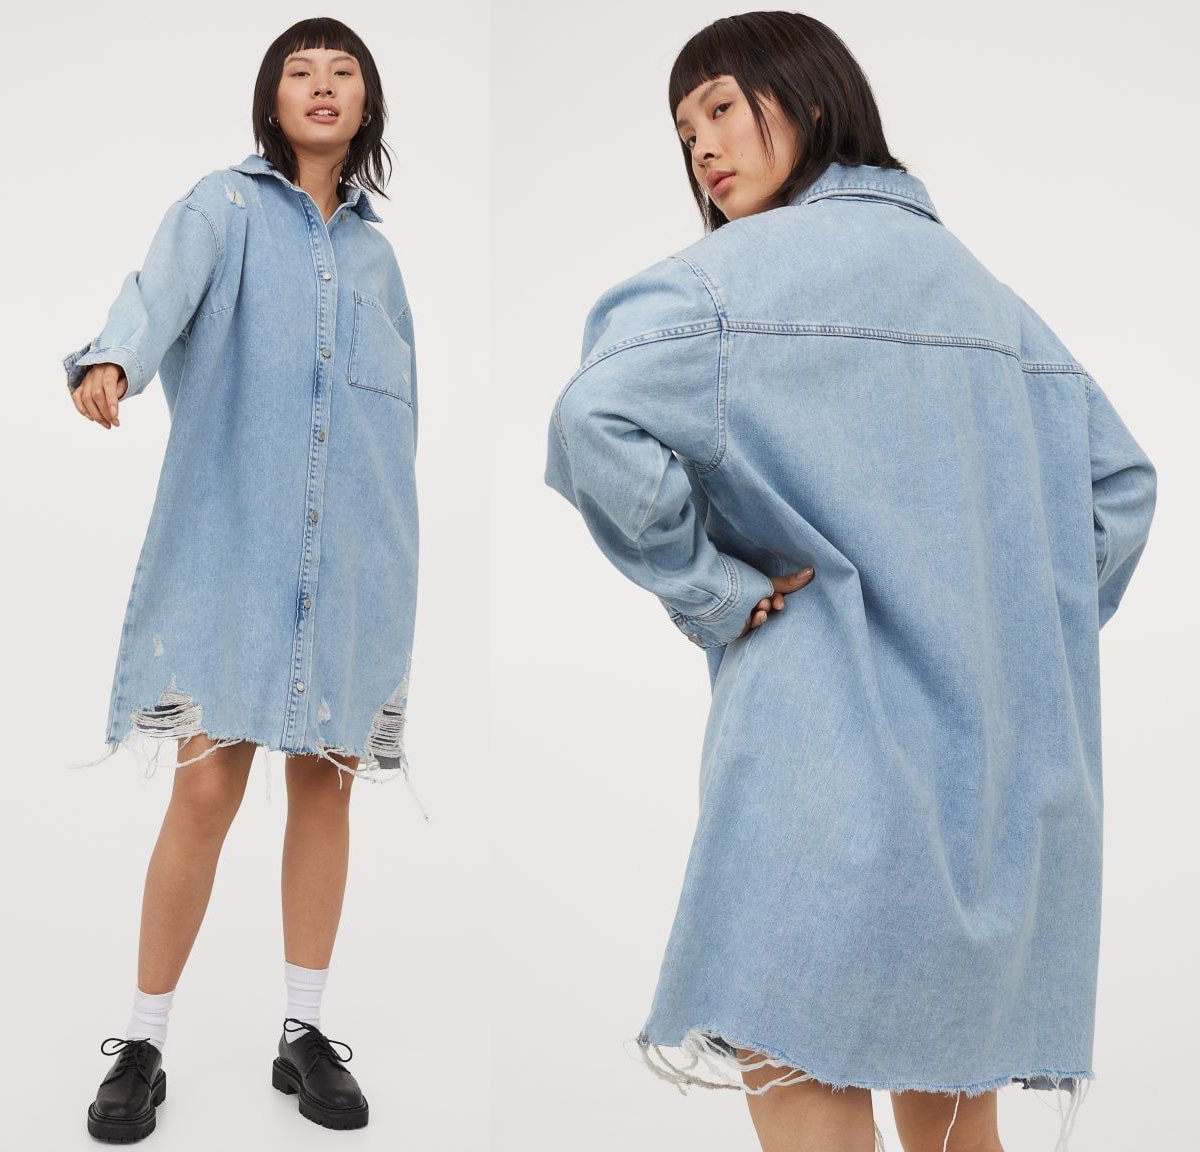 This oversized denim dress with shredded and frayed hem is a must-have for summer